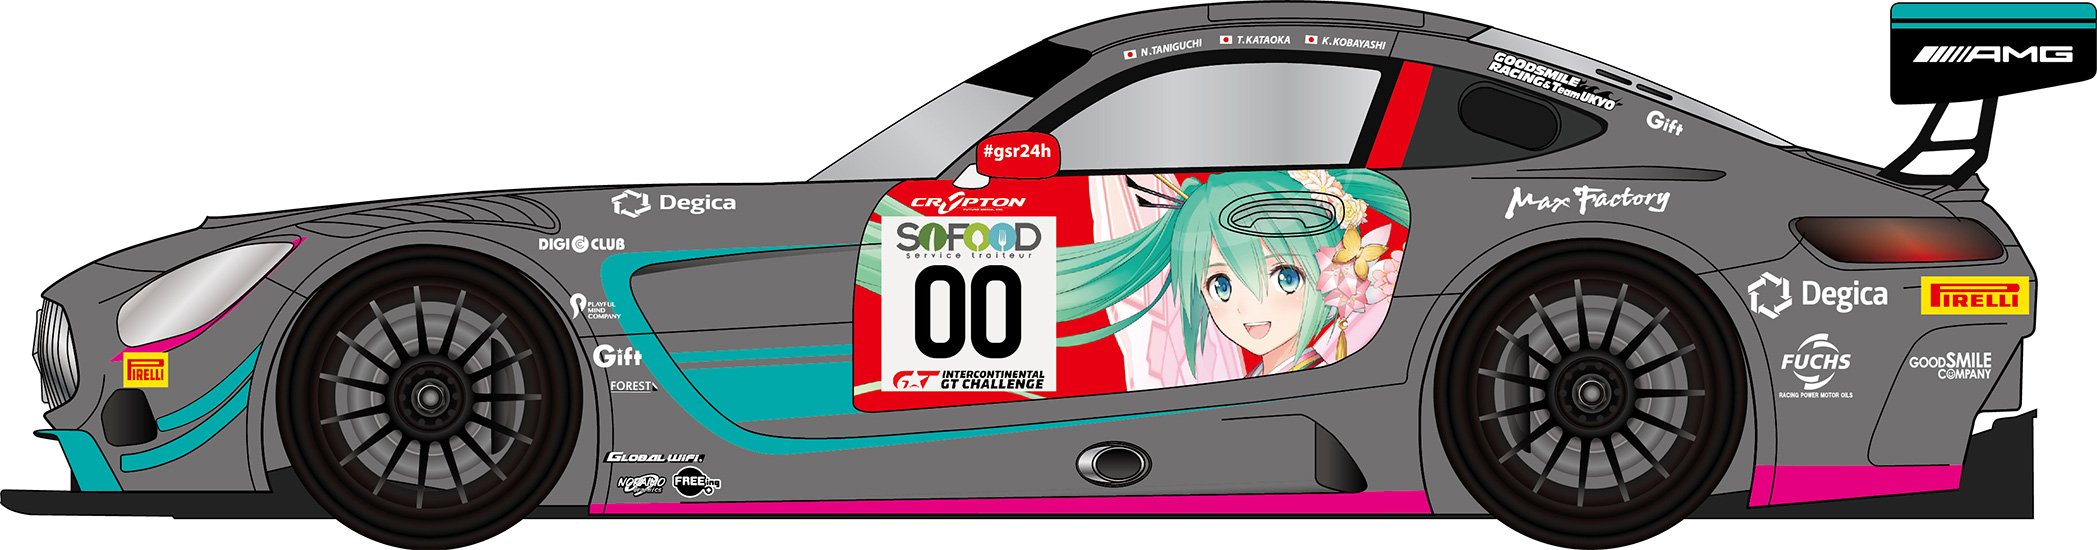 Good Smile Racing Hatsune Miku Gt Project 2017 Spa24H Final Ver. 1/32 Scale Abs Pre-Painted Minicar (Japan)